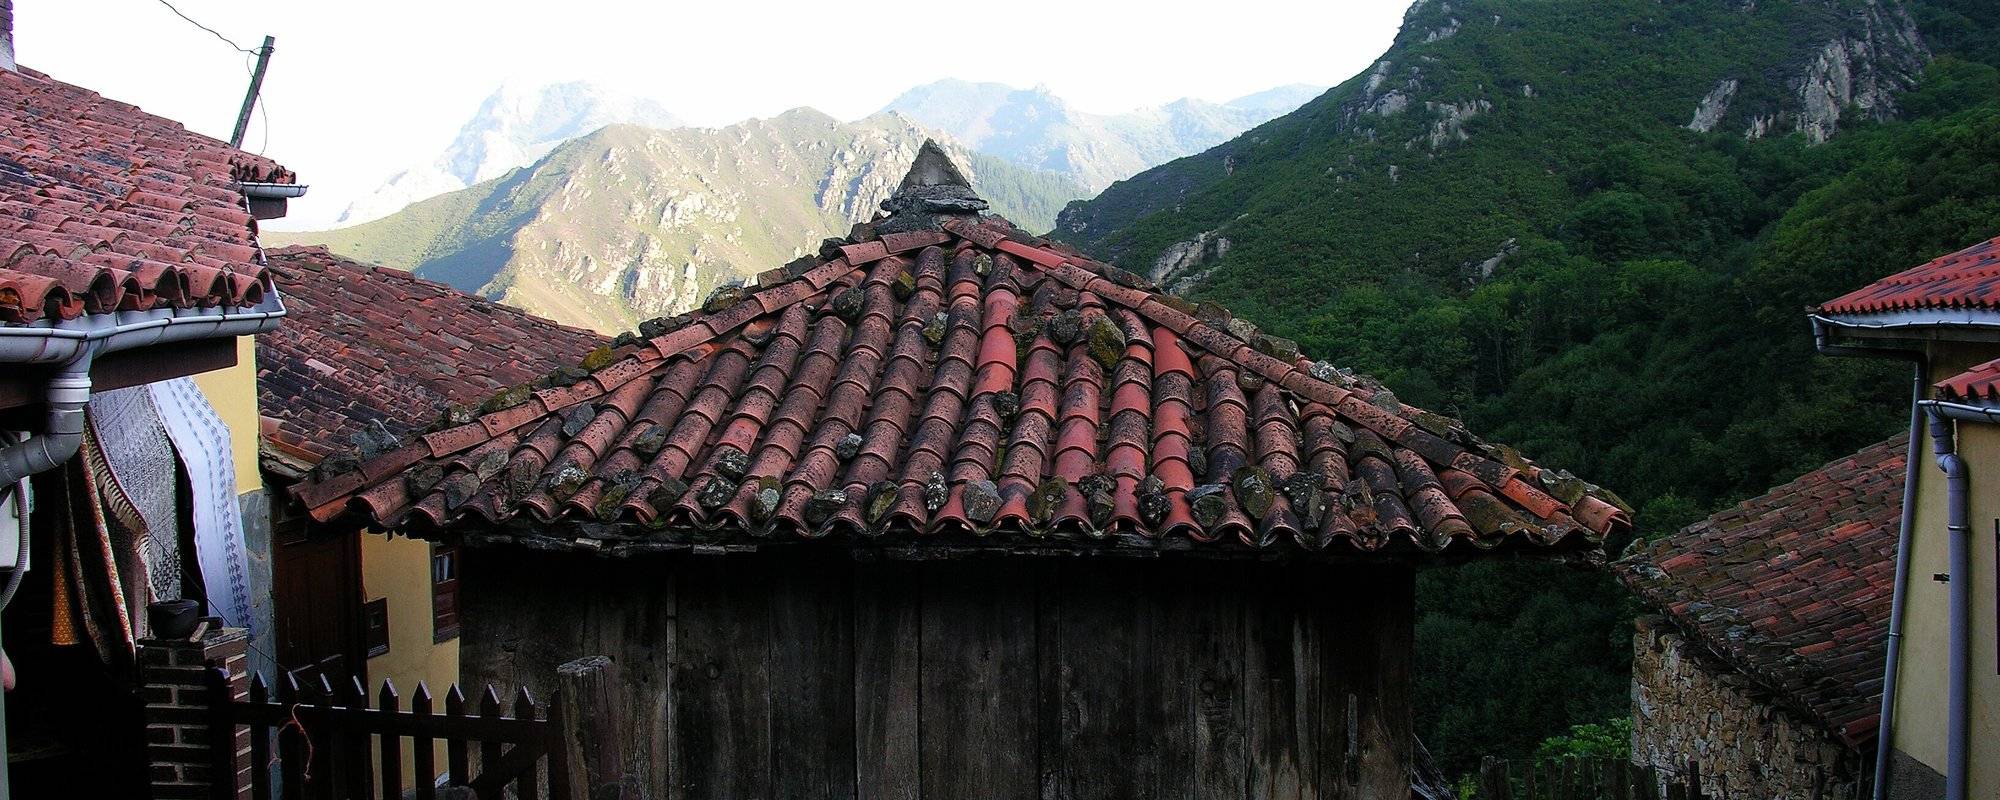 The asturians granaries and their ancestral symbolism